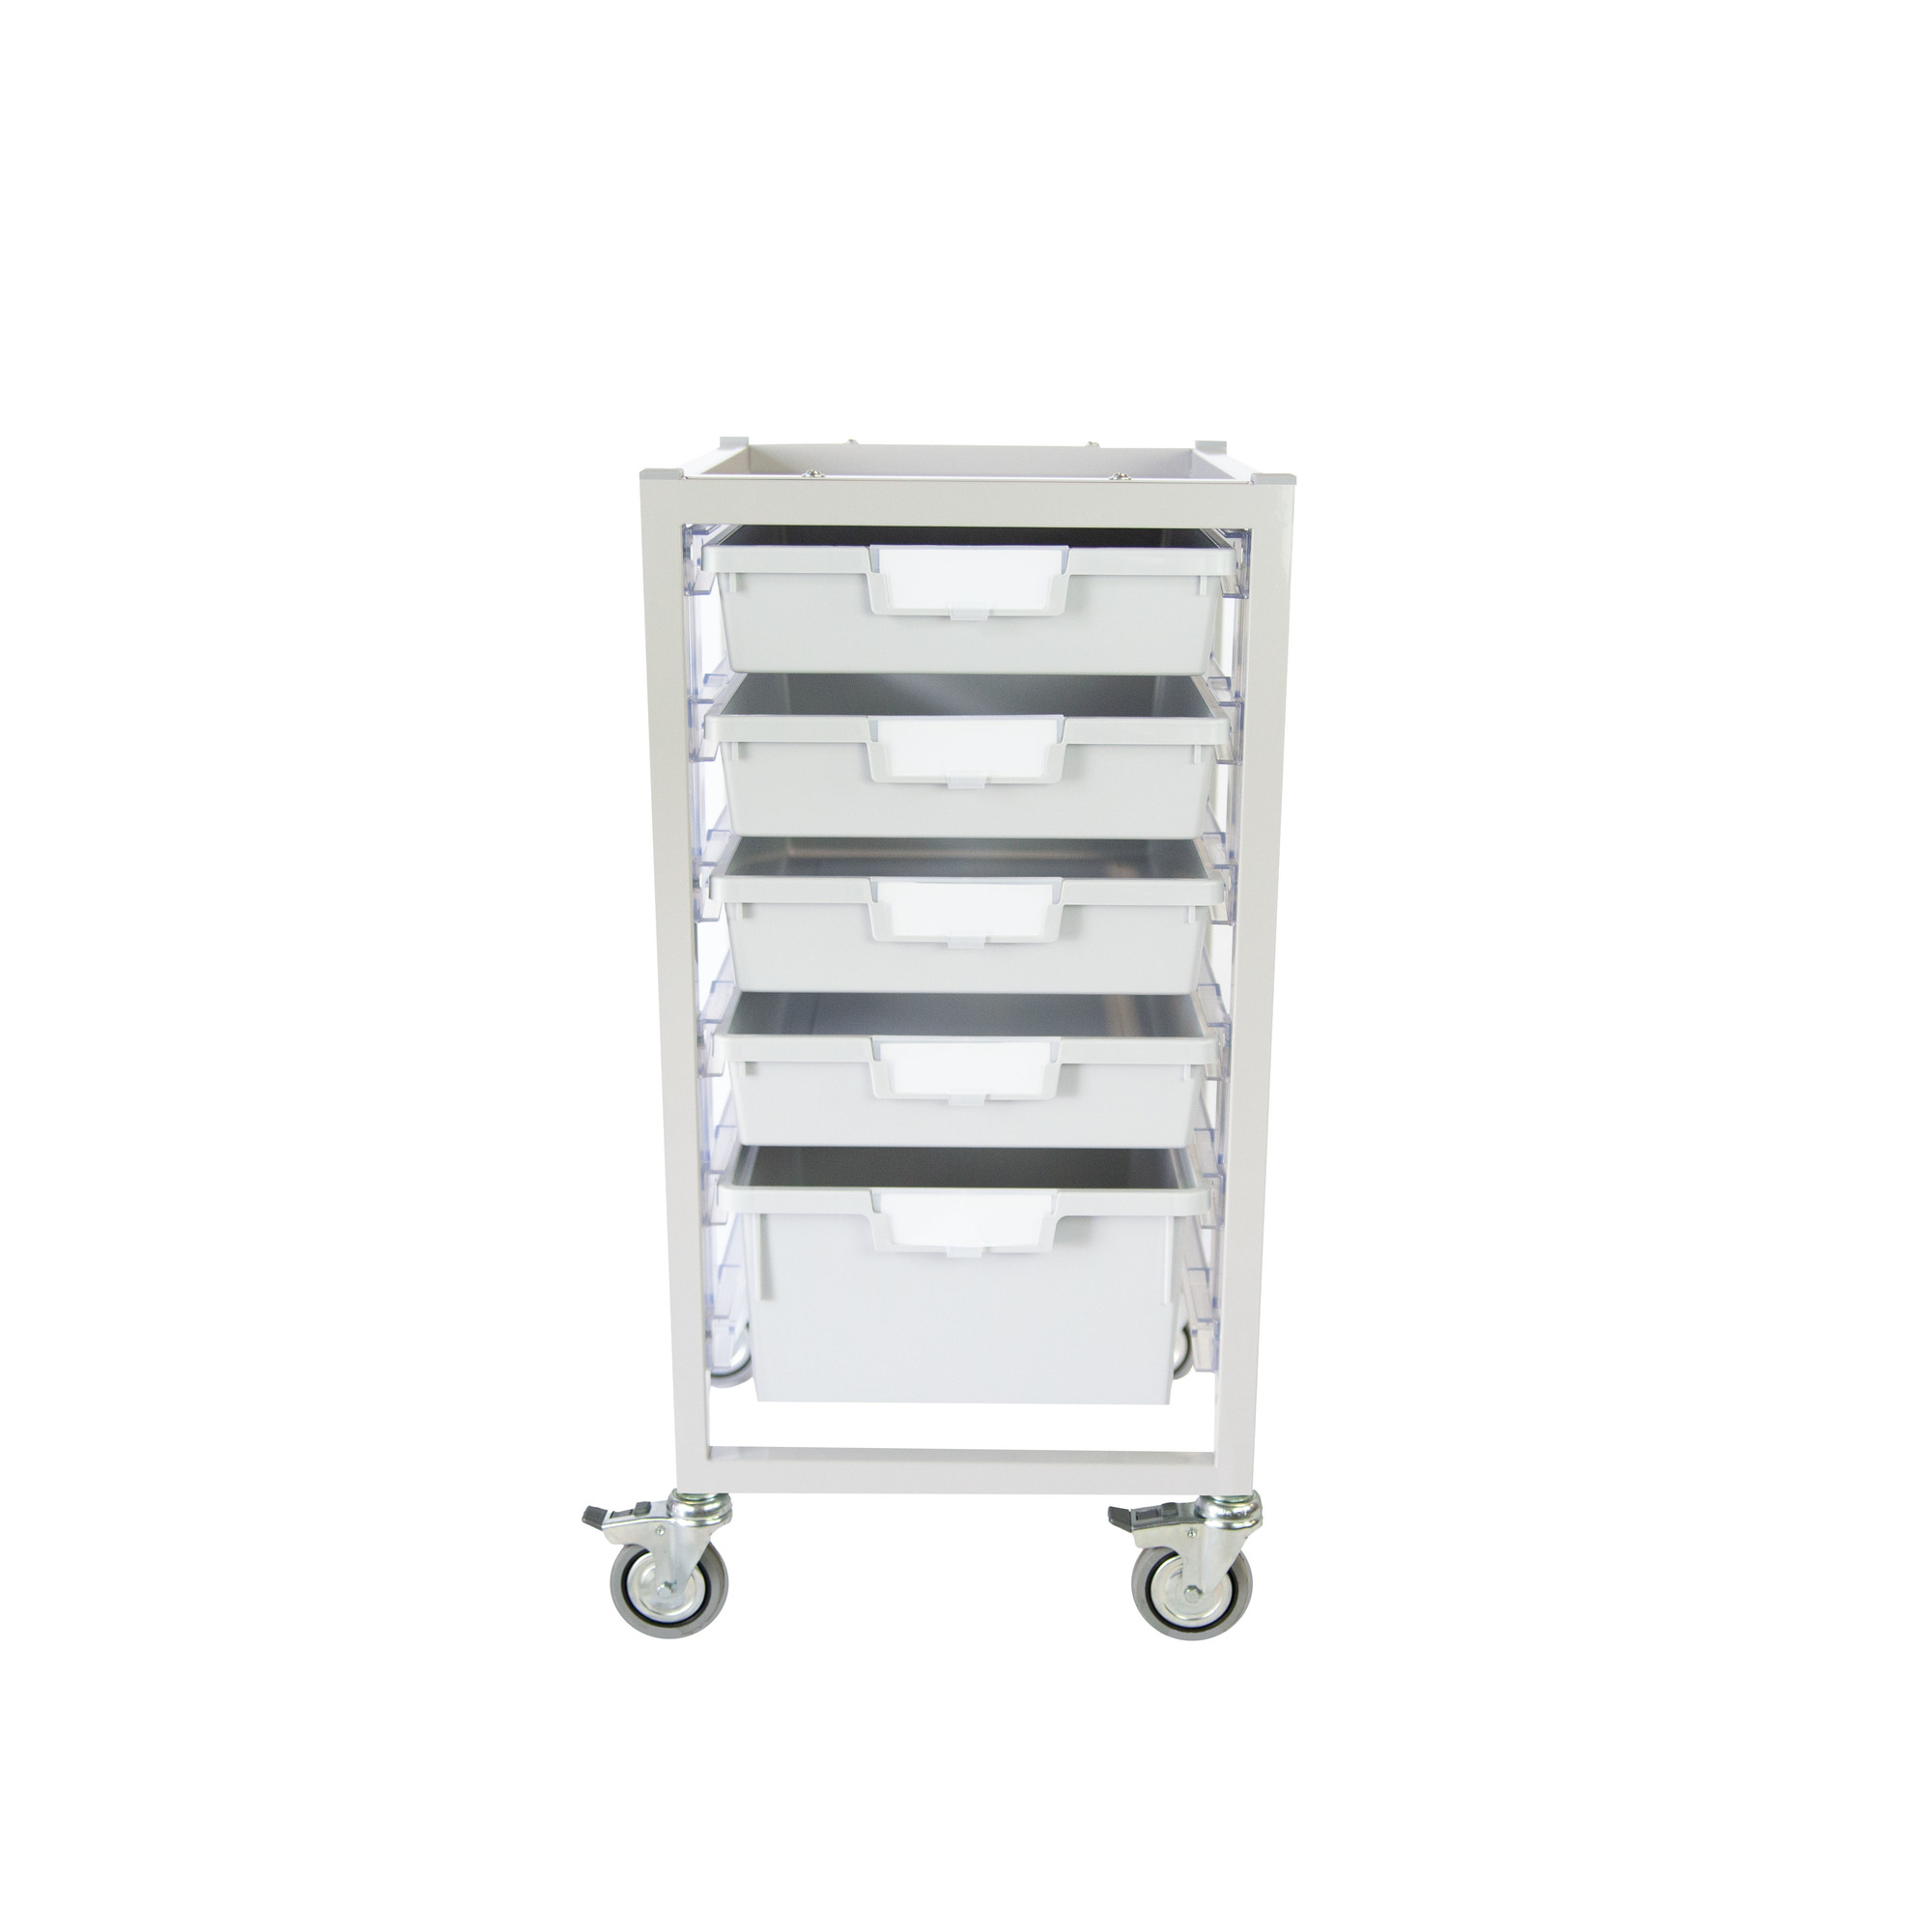 Certwood, Nimble Cart Slim-Gray with 5 Yellow Trays, Included (qty.) 1, Material Steel, Height 15.75 in, Model CE2100LG-4S1DPY